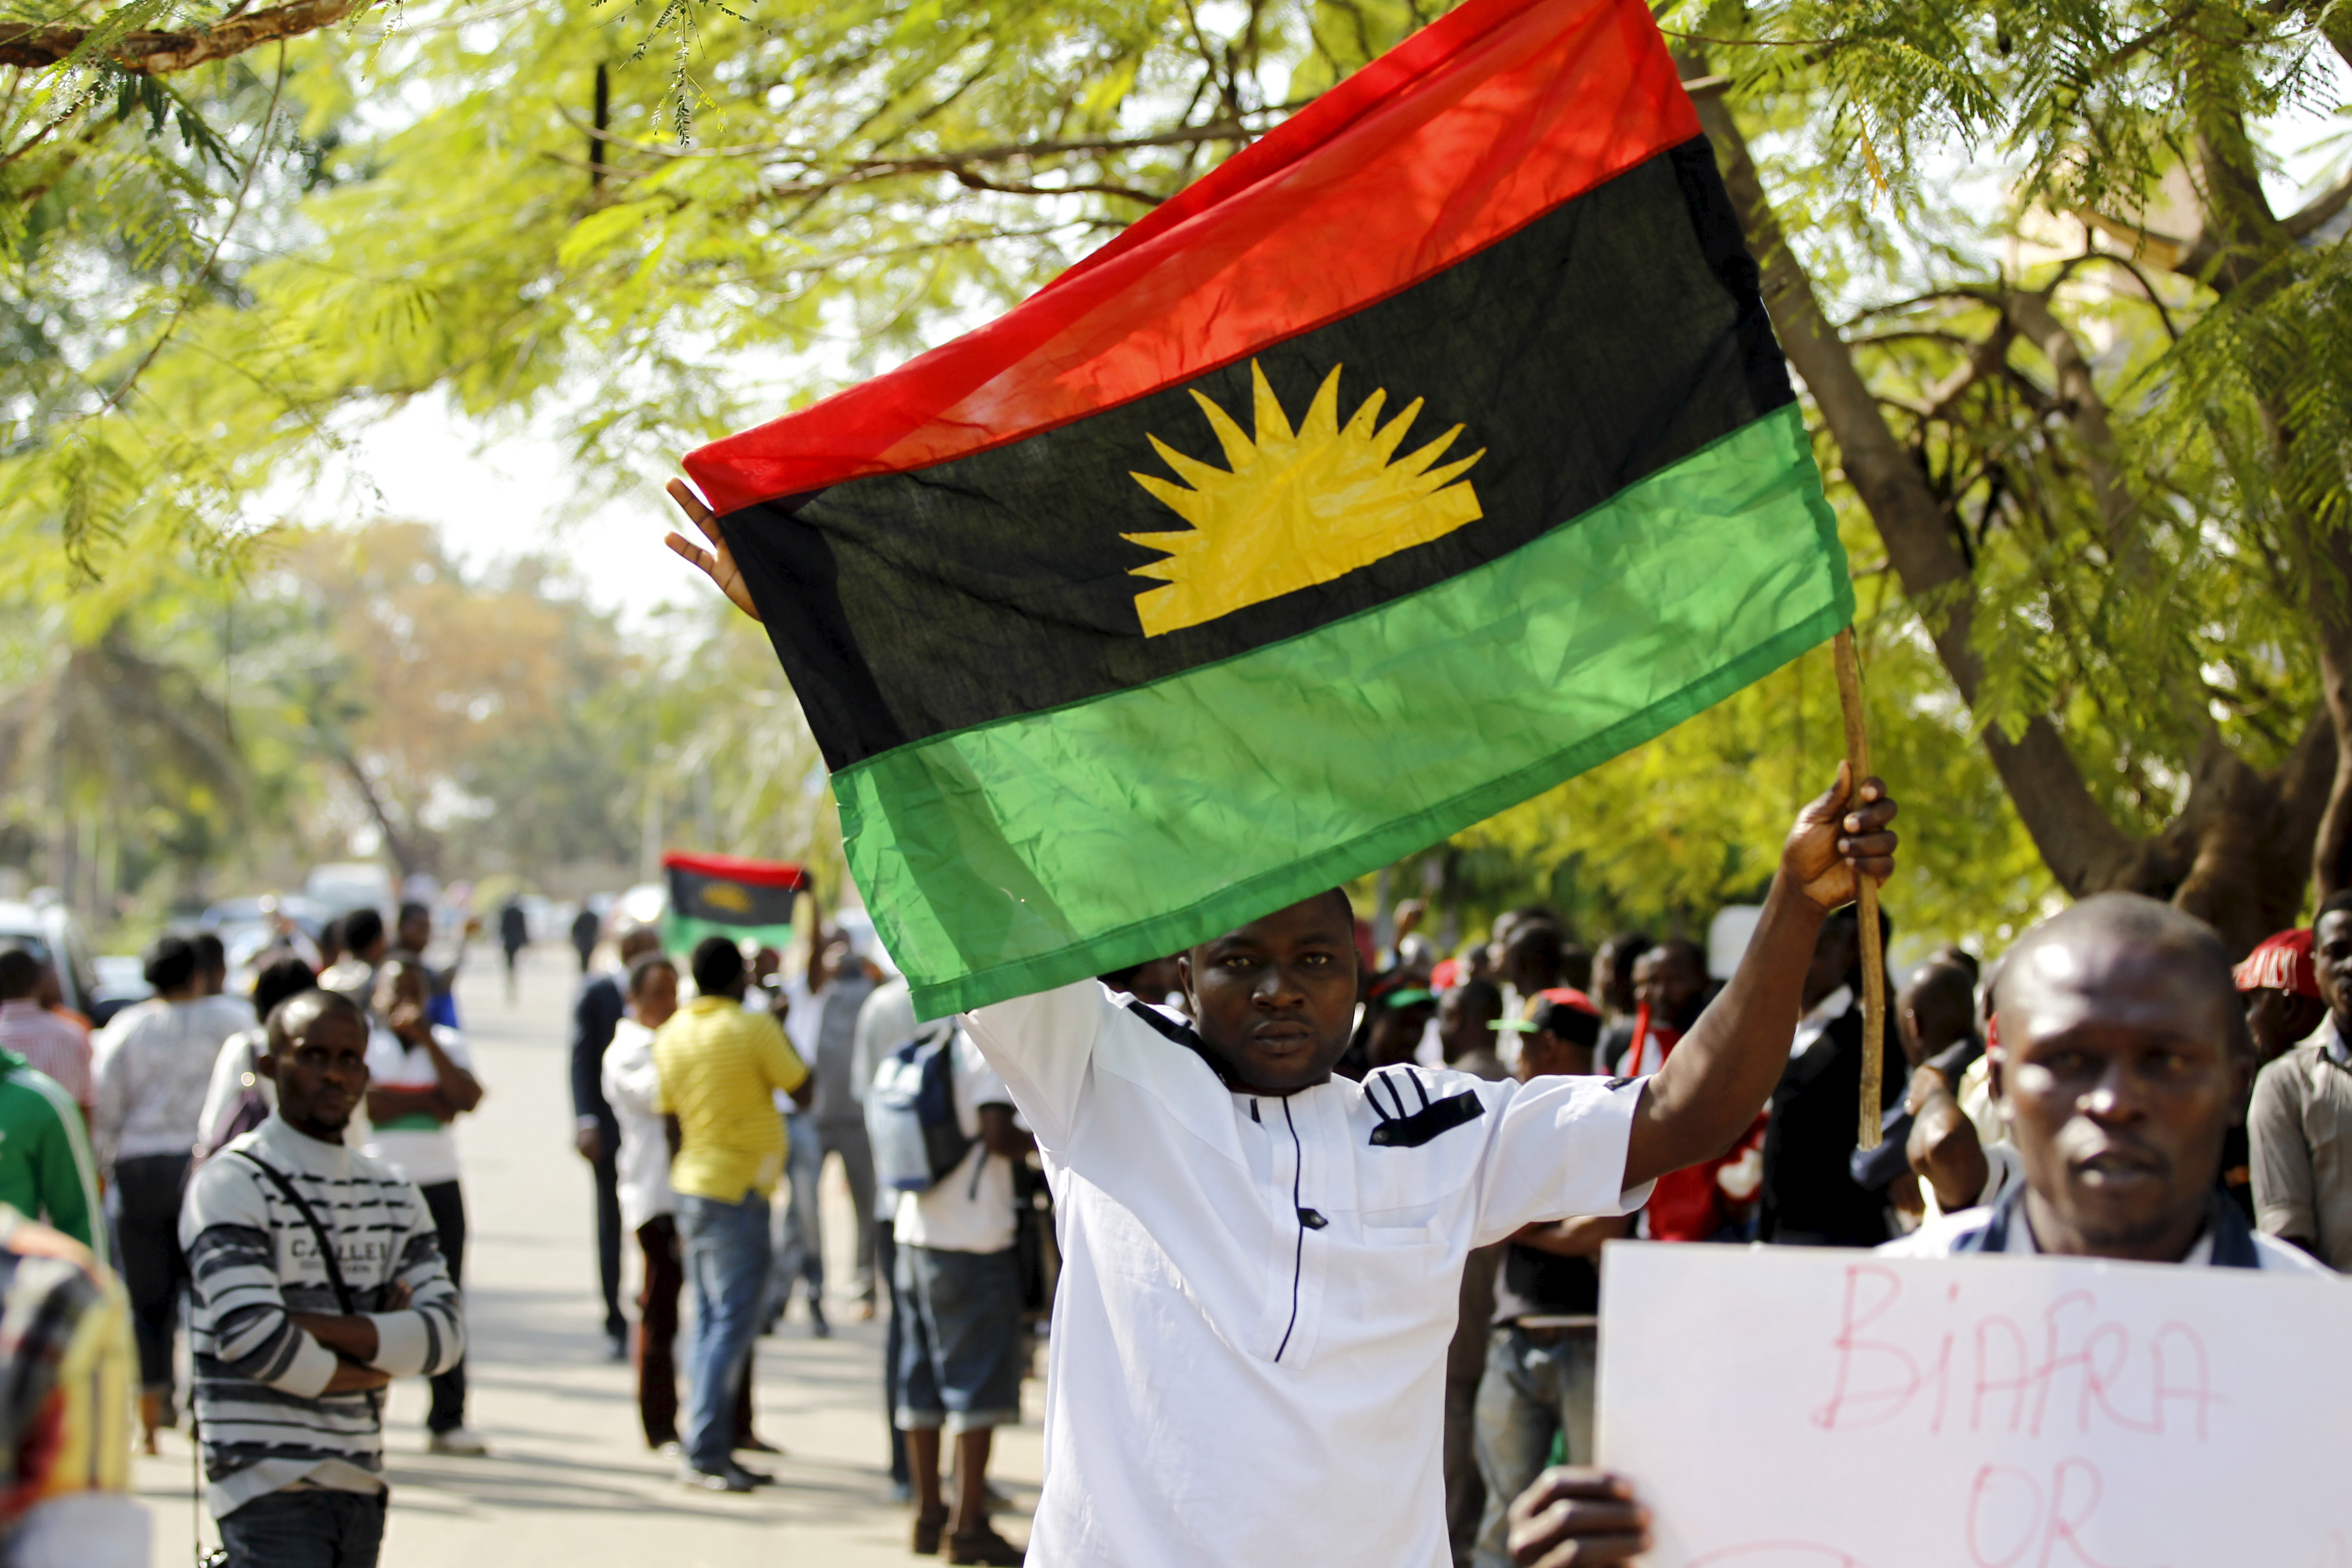 Biafra: Why some Nigerians are calling for independence - Newsweek